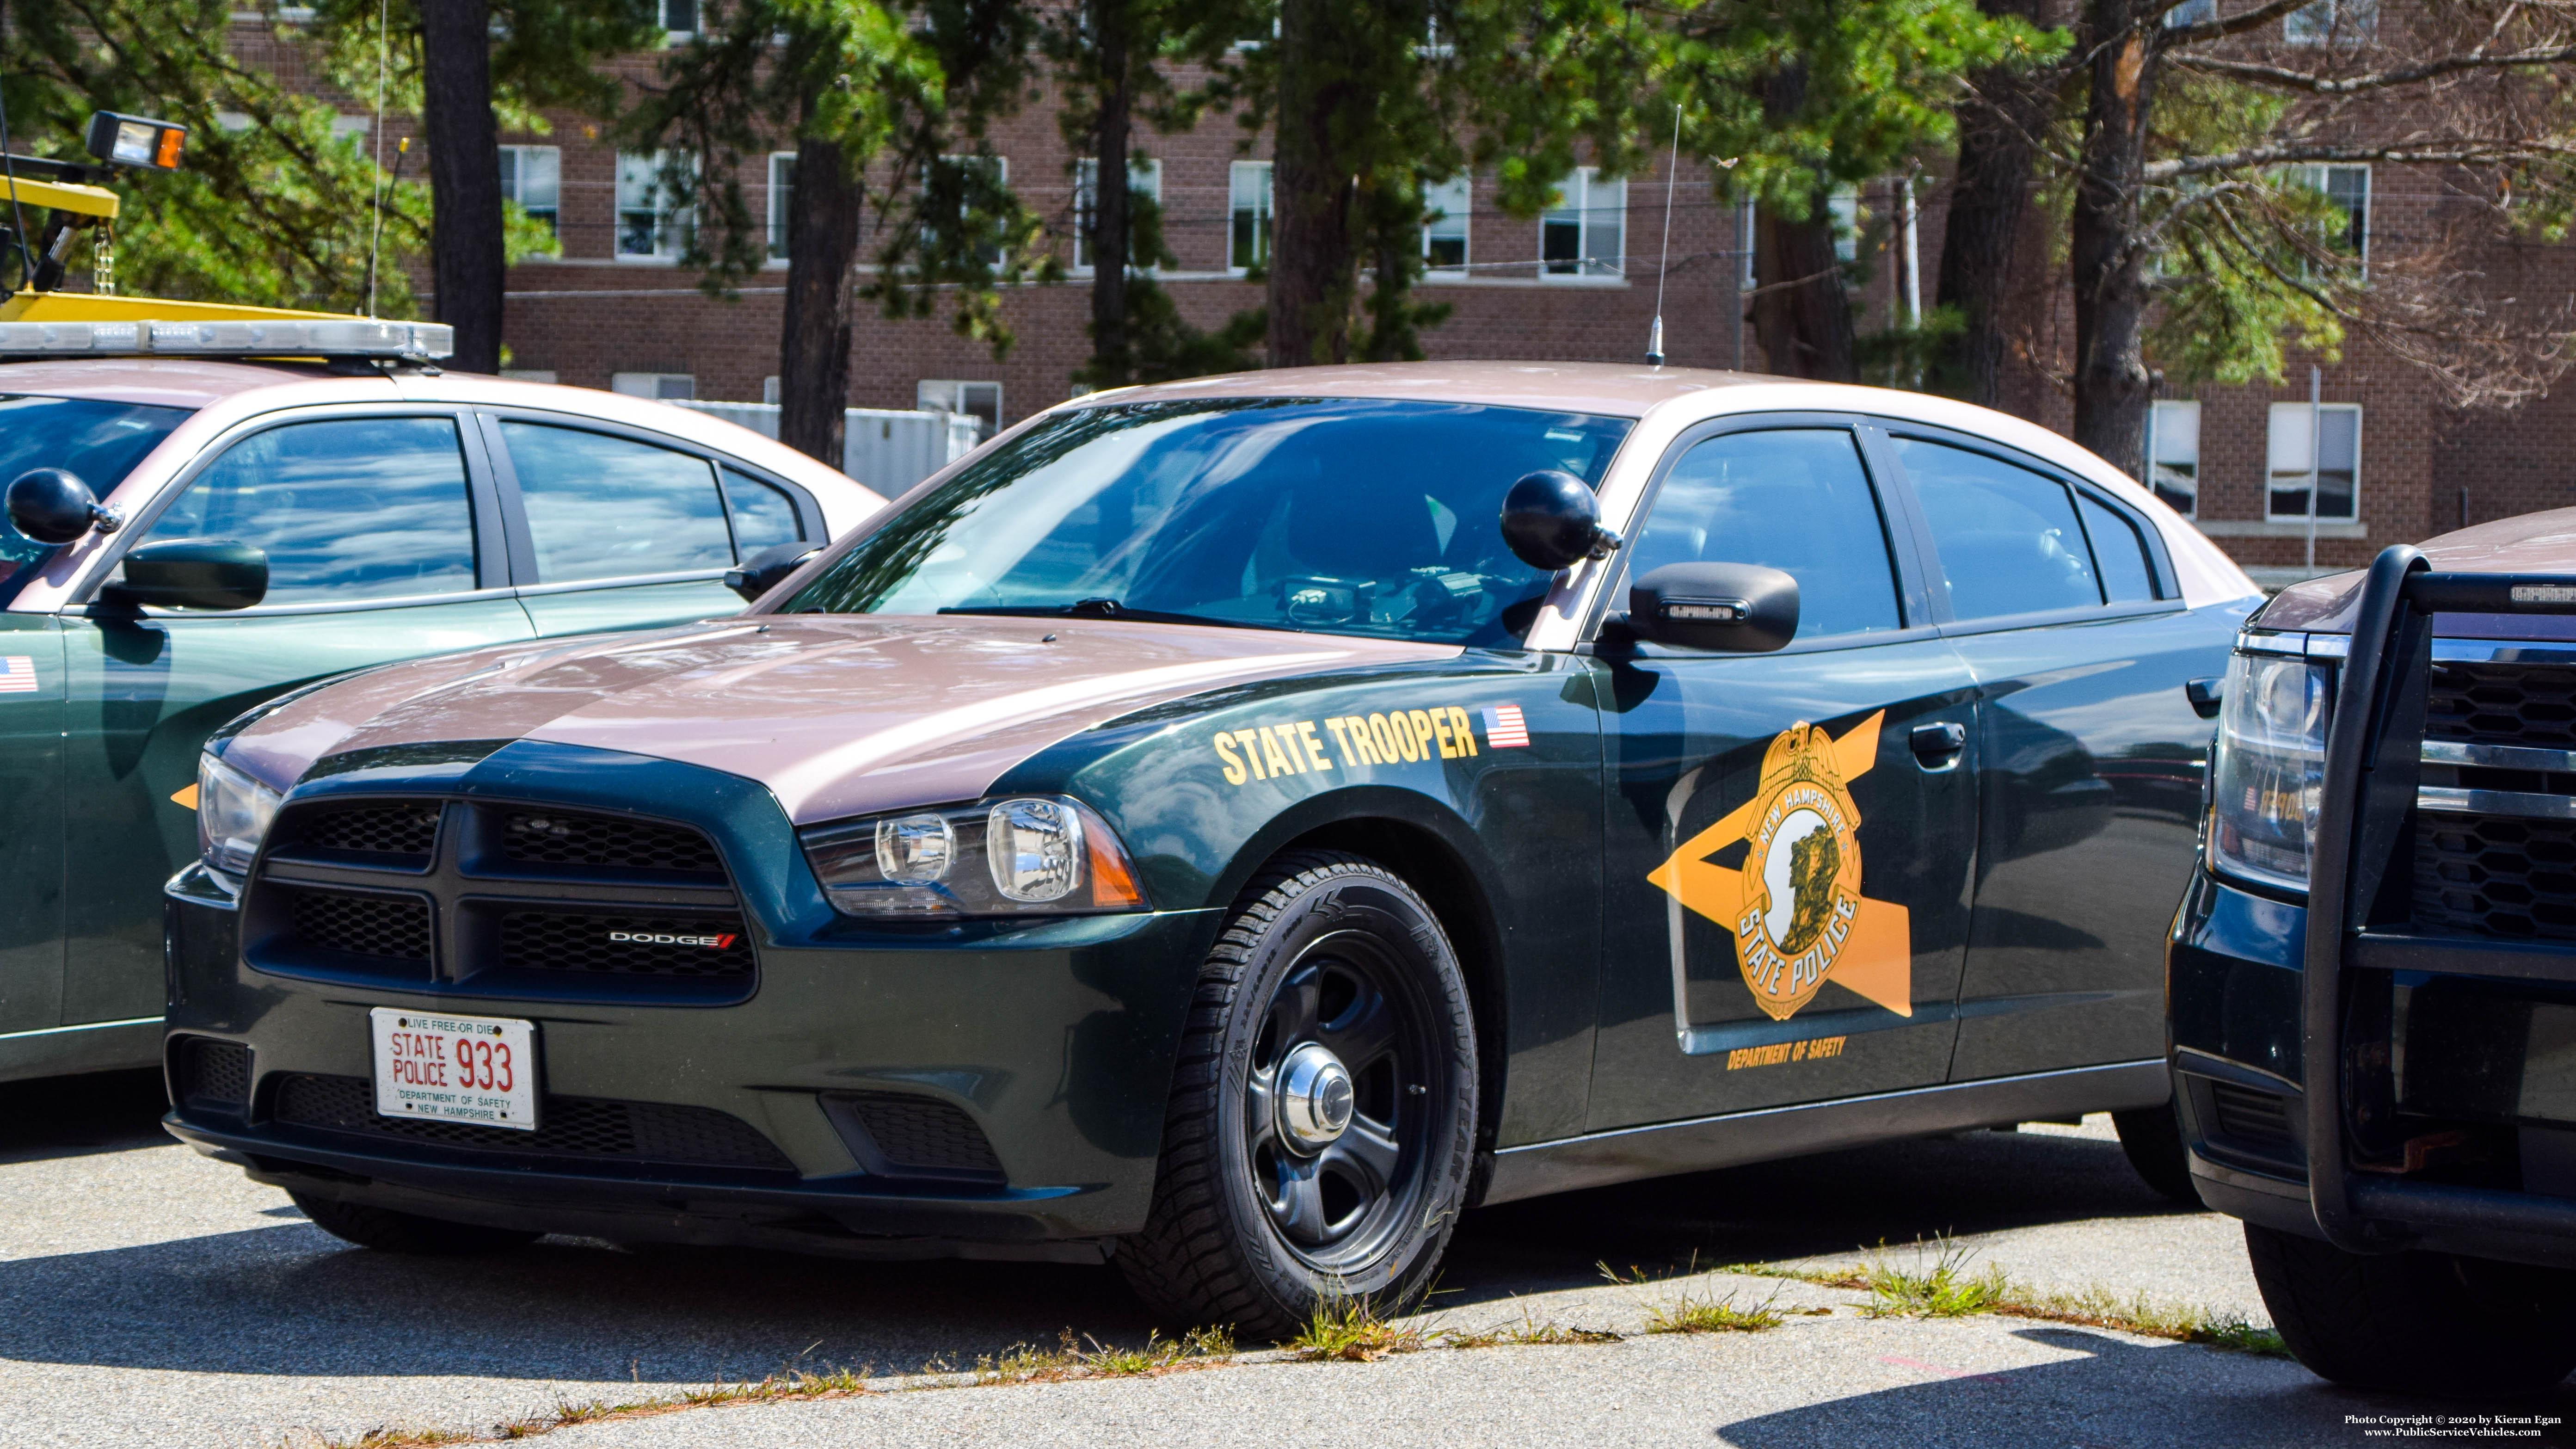 A photo  of New Hampshire State Police
            Cruiser 933, a 2011-2014 Dodge Charger             taken by Kieran Egan